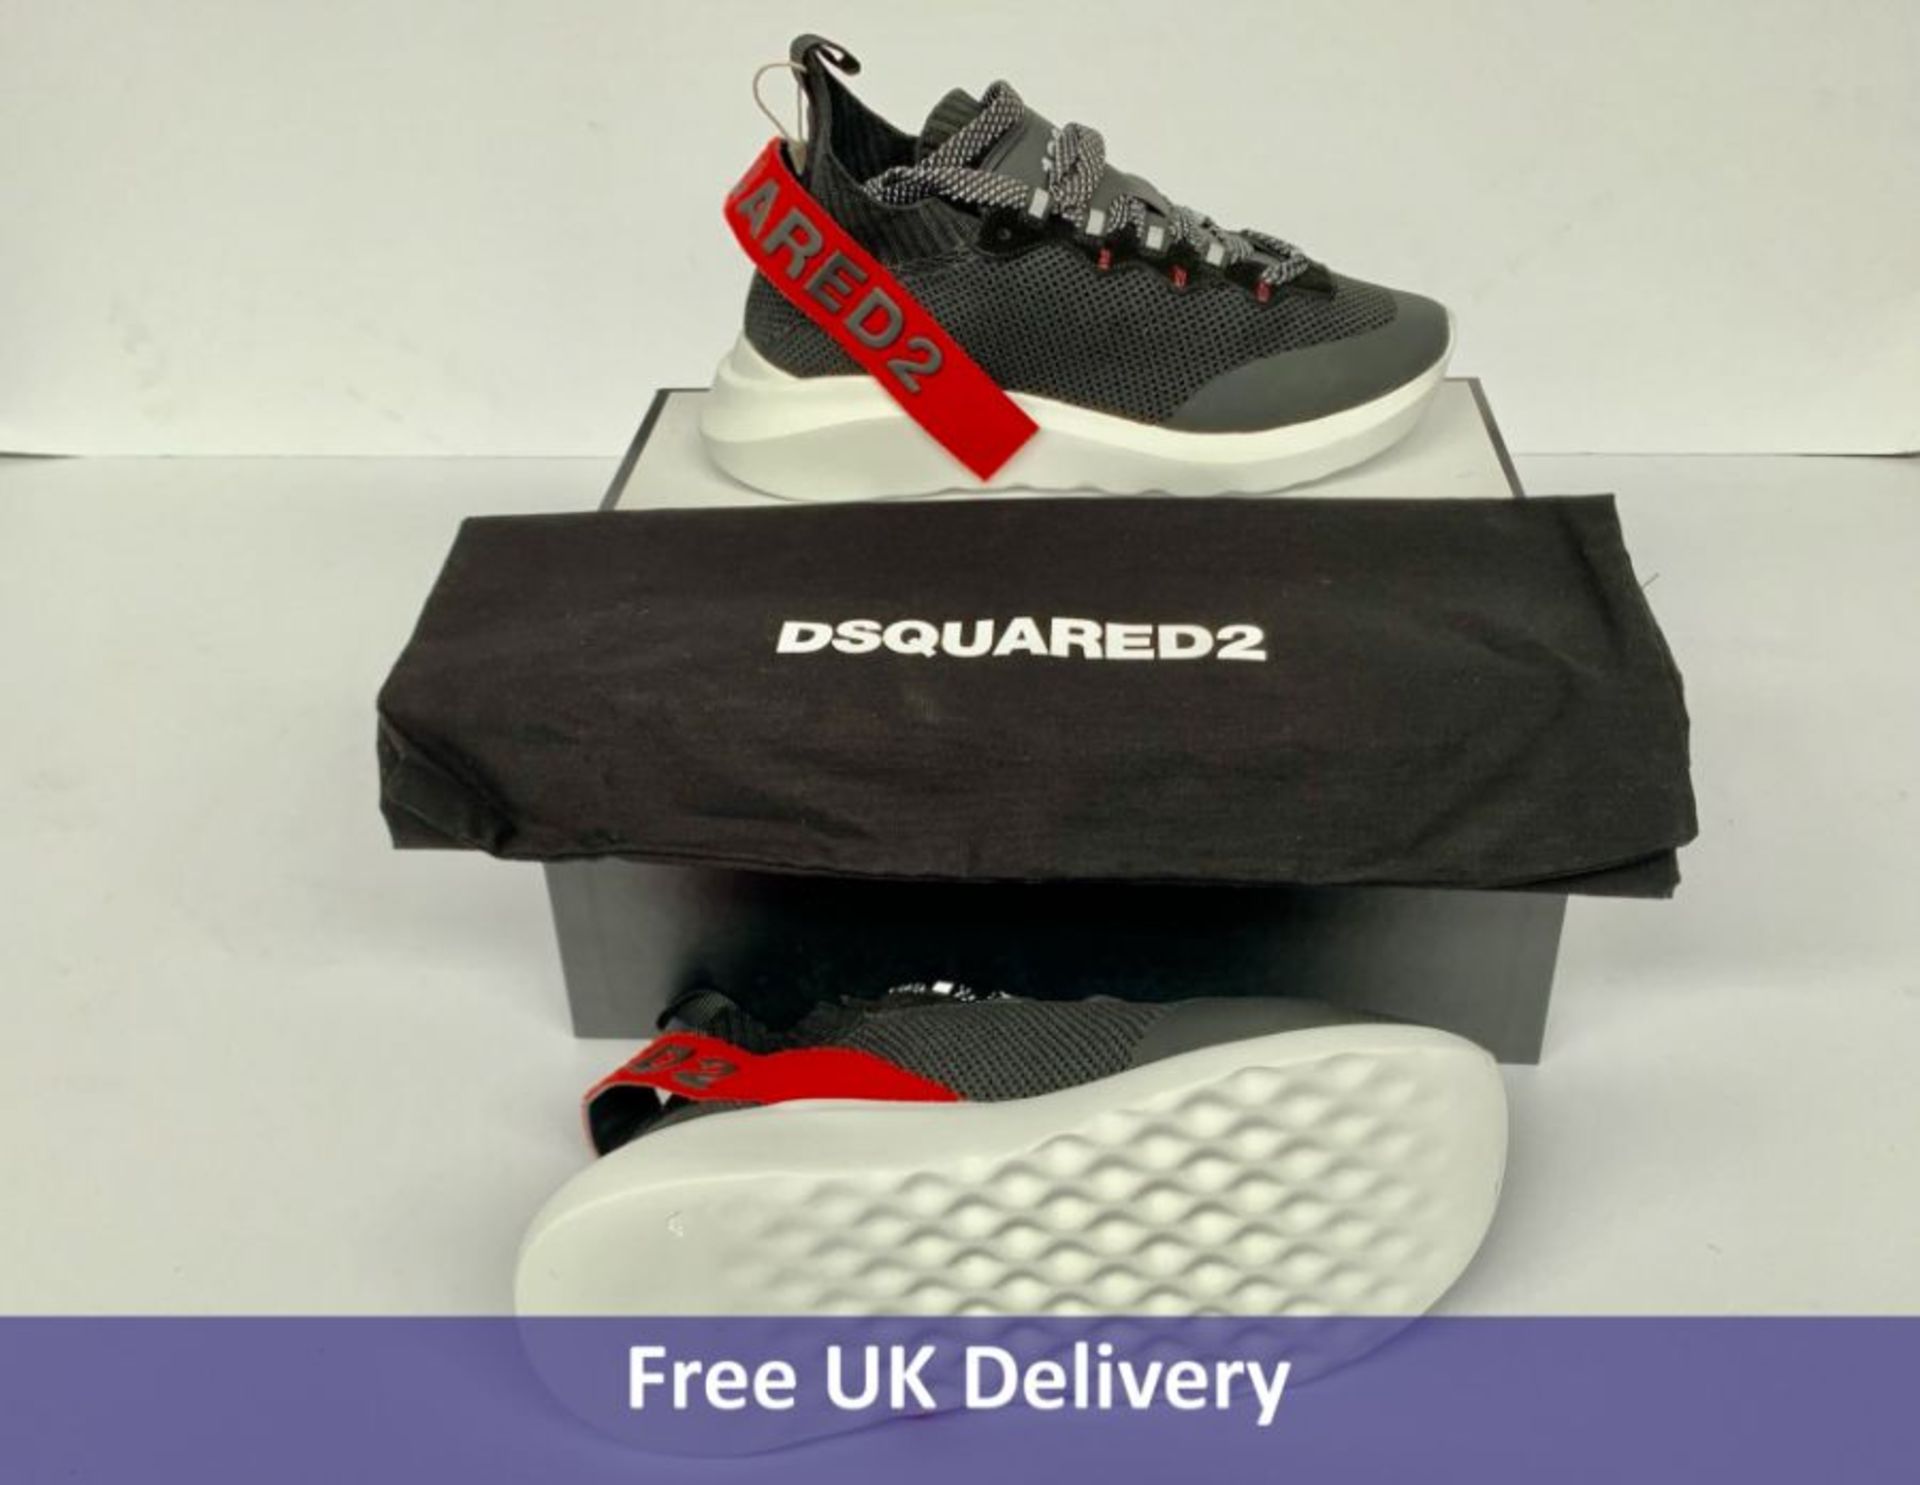 DSquared2 Lace Up Low Top Sneakers, Black and Red, EU 40